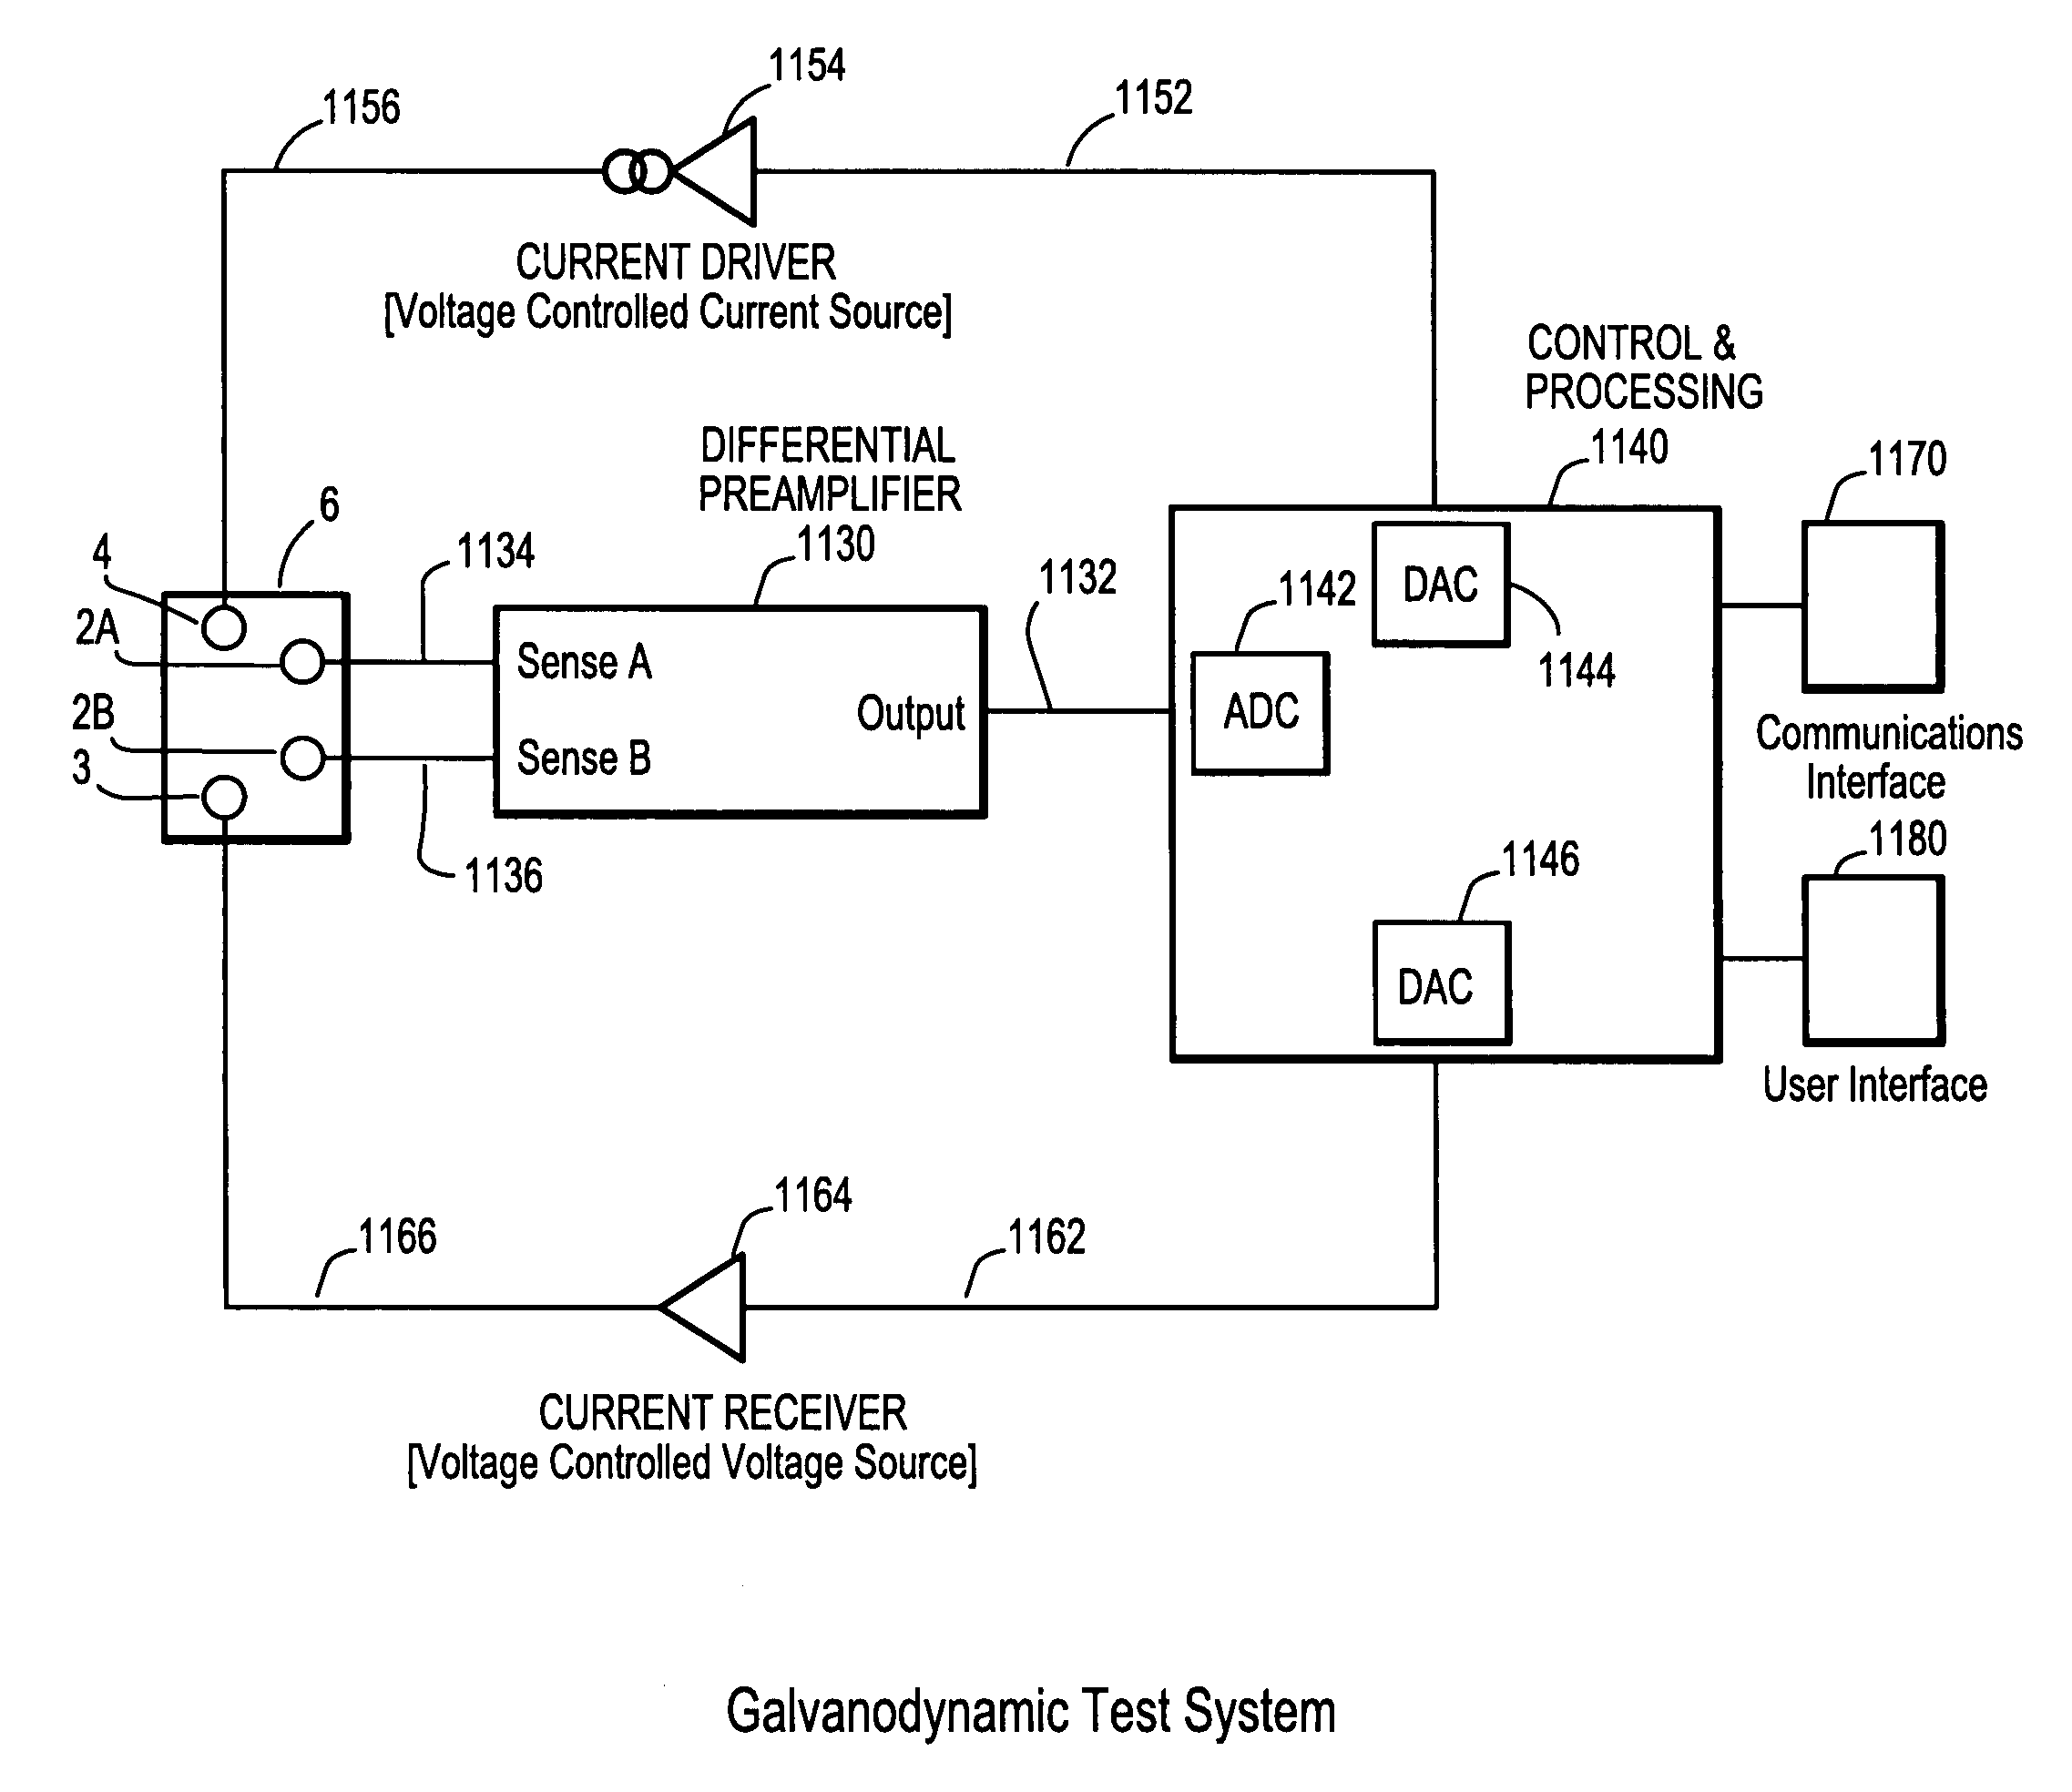 Method of analyzing the time-varying electrical response of a stimulated target substance